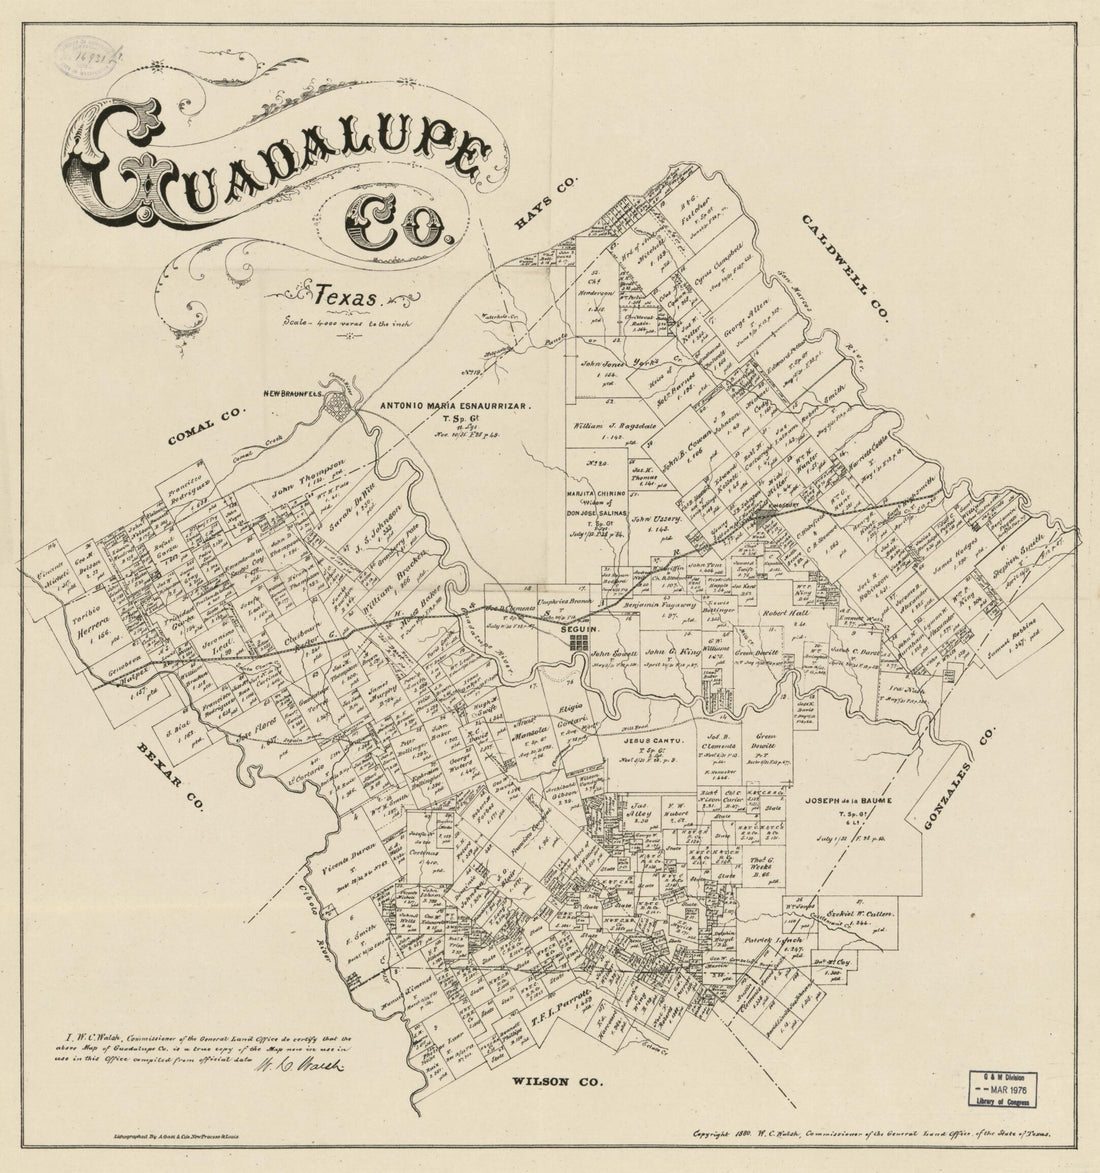 This old map of Guadalupe Co., Texas. (Guadalupe County, Texas) from 1880 was created by  August Gast &amp; Co,  Texas. General Land Office, W. C. (William C.) Walsh in 1880